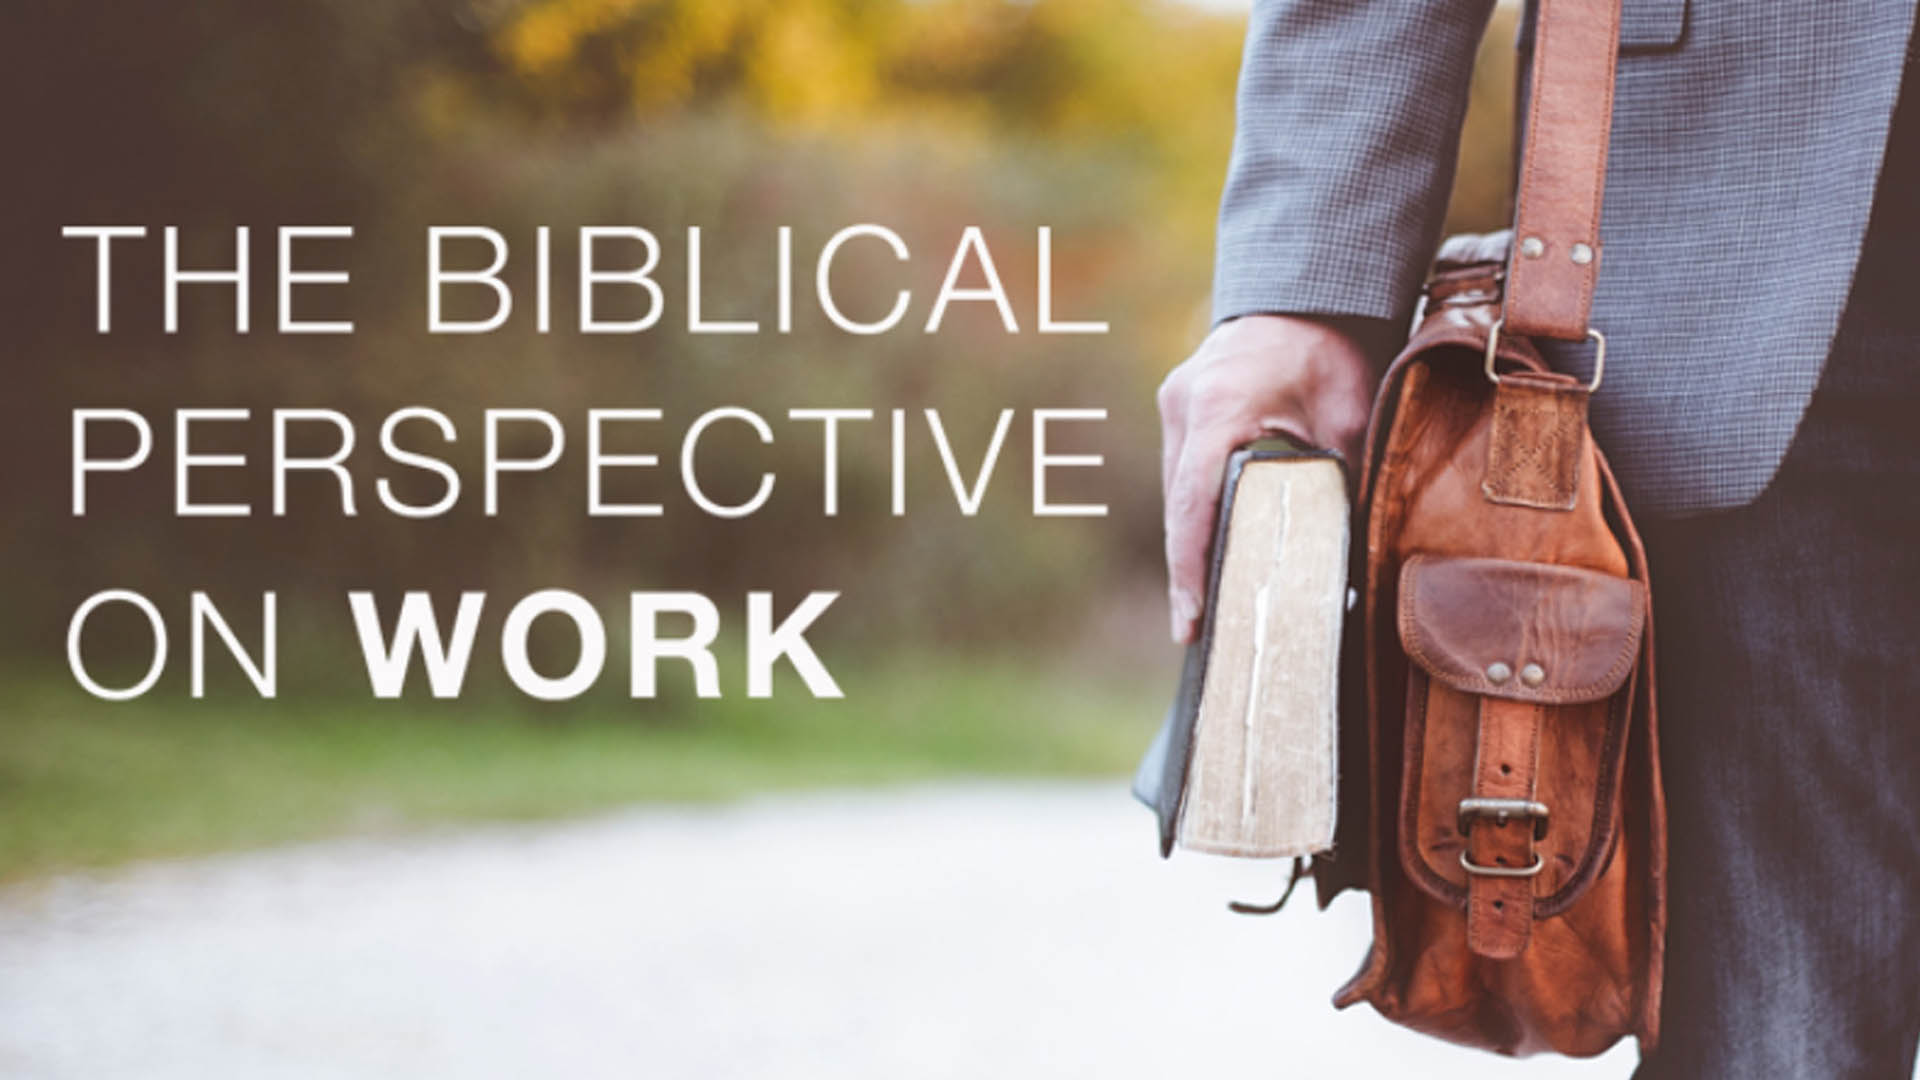 The Biblical Perspective on Work